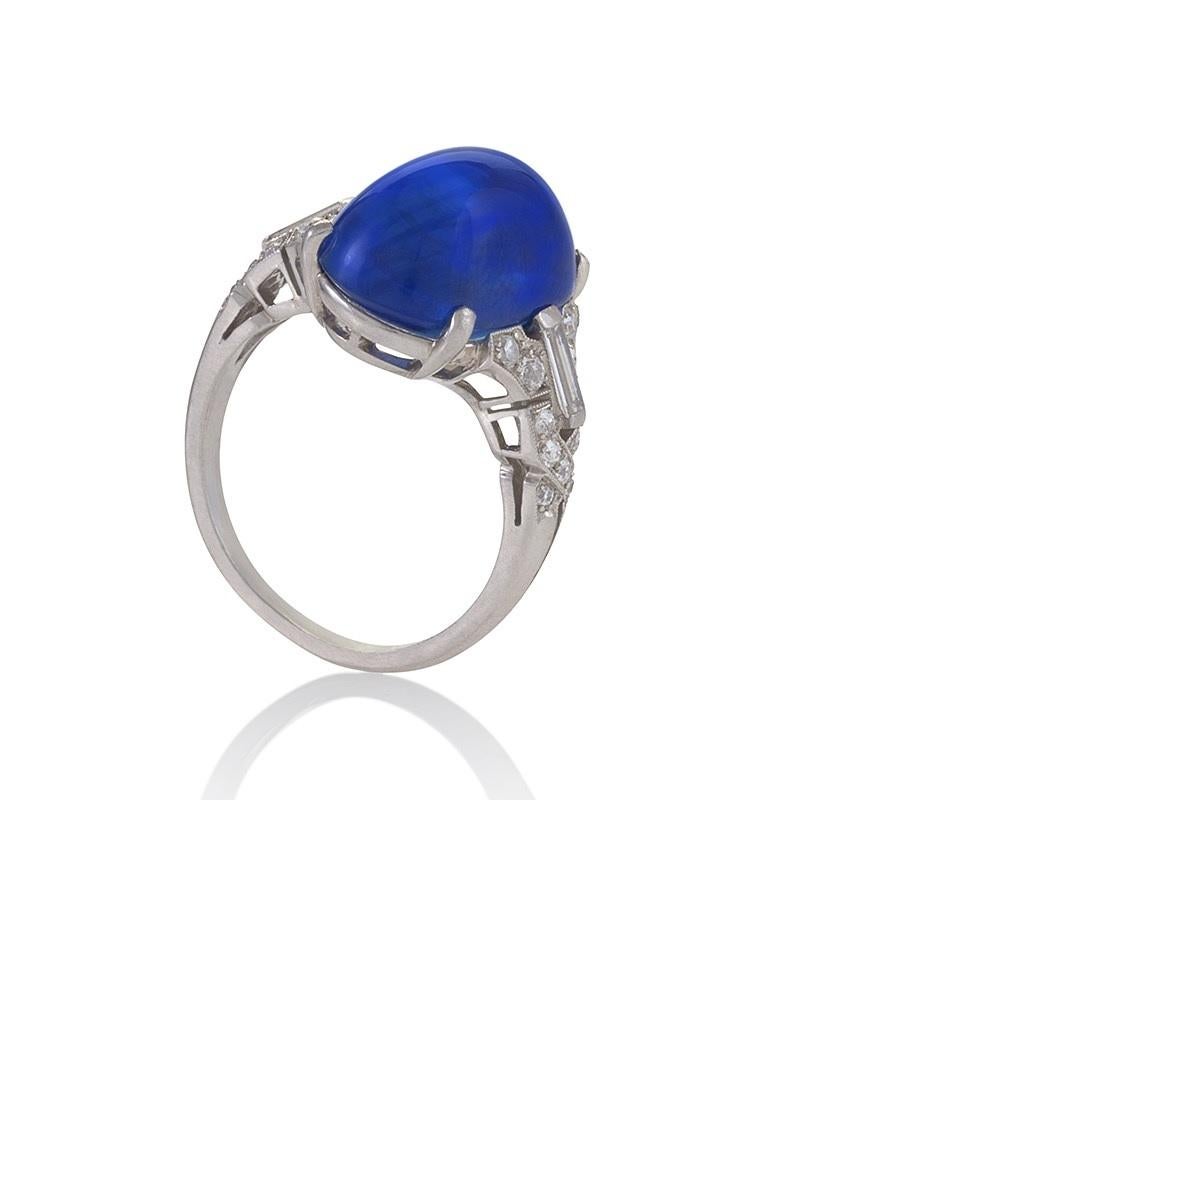 This substantial cabochon blue sapphire and diamond ring is a beautiful example of Art Deco opulence. Elegantly proportioned and reminiscent of architectural splendor, the graceful gem is flanked by delicate openwork shoulders enhanced by round- and